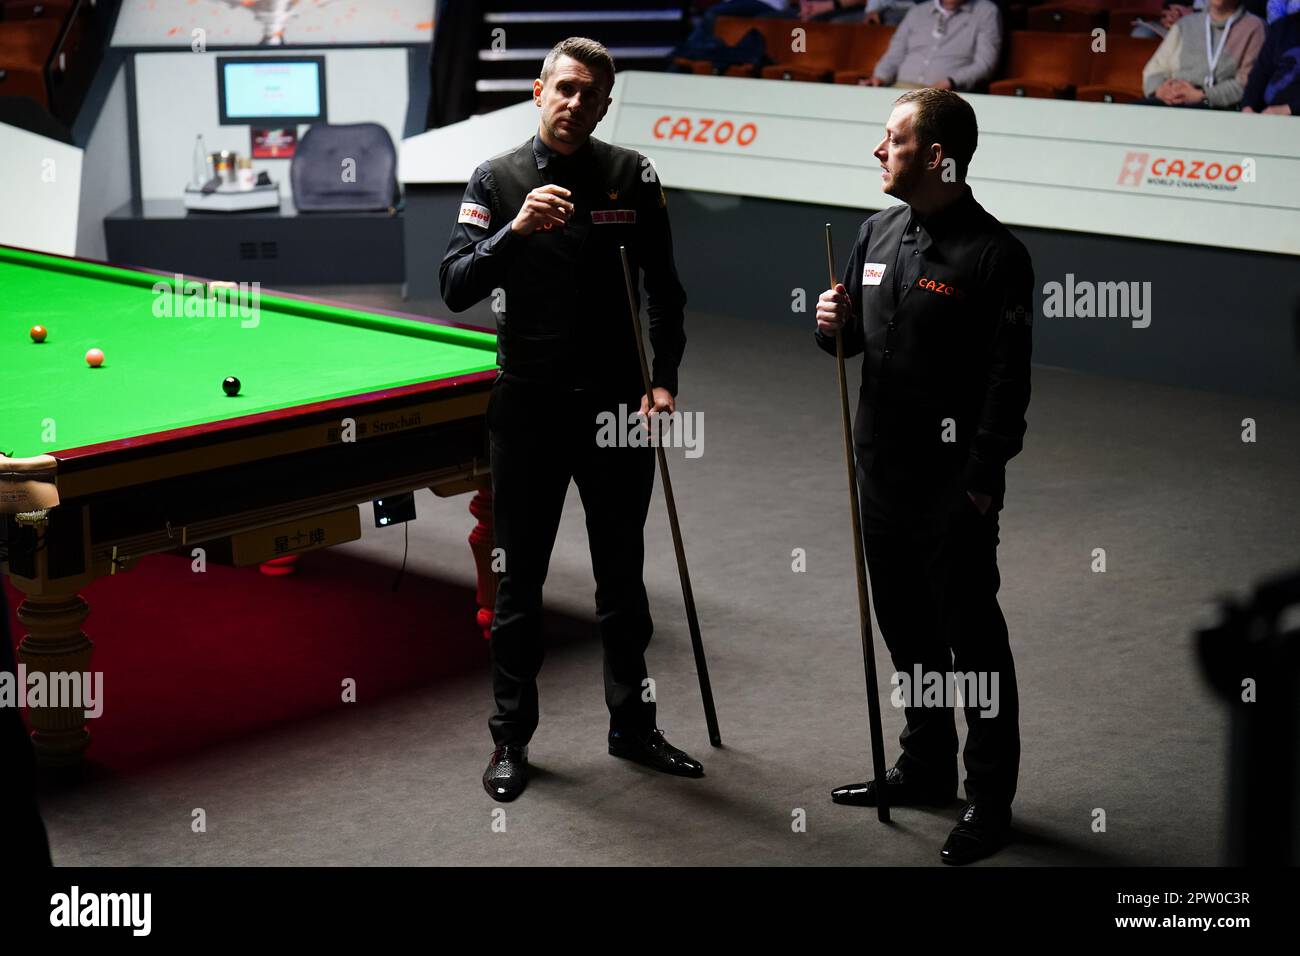 Mark Allen and Mark Selby (left) discuss the score during their match on day fourteen of the Cazoo World Snooker Championship at the Crucible Theatre, Sheffield